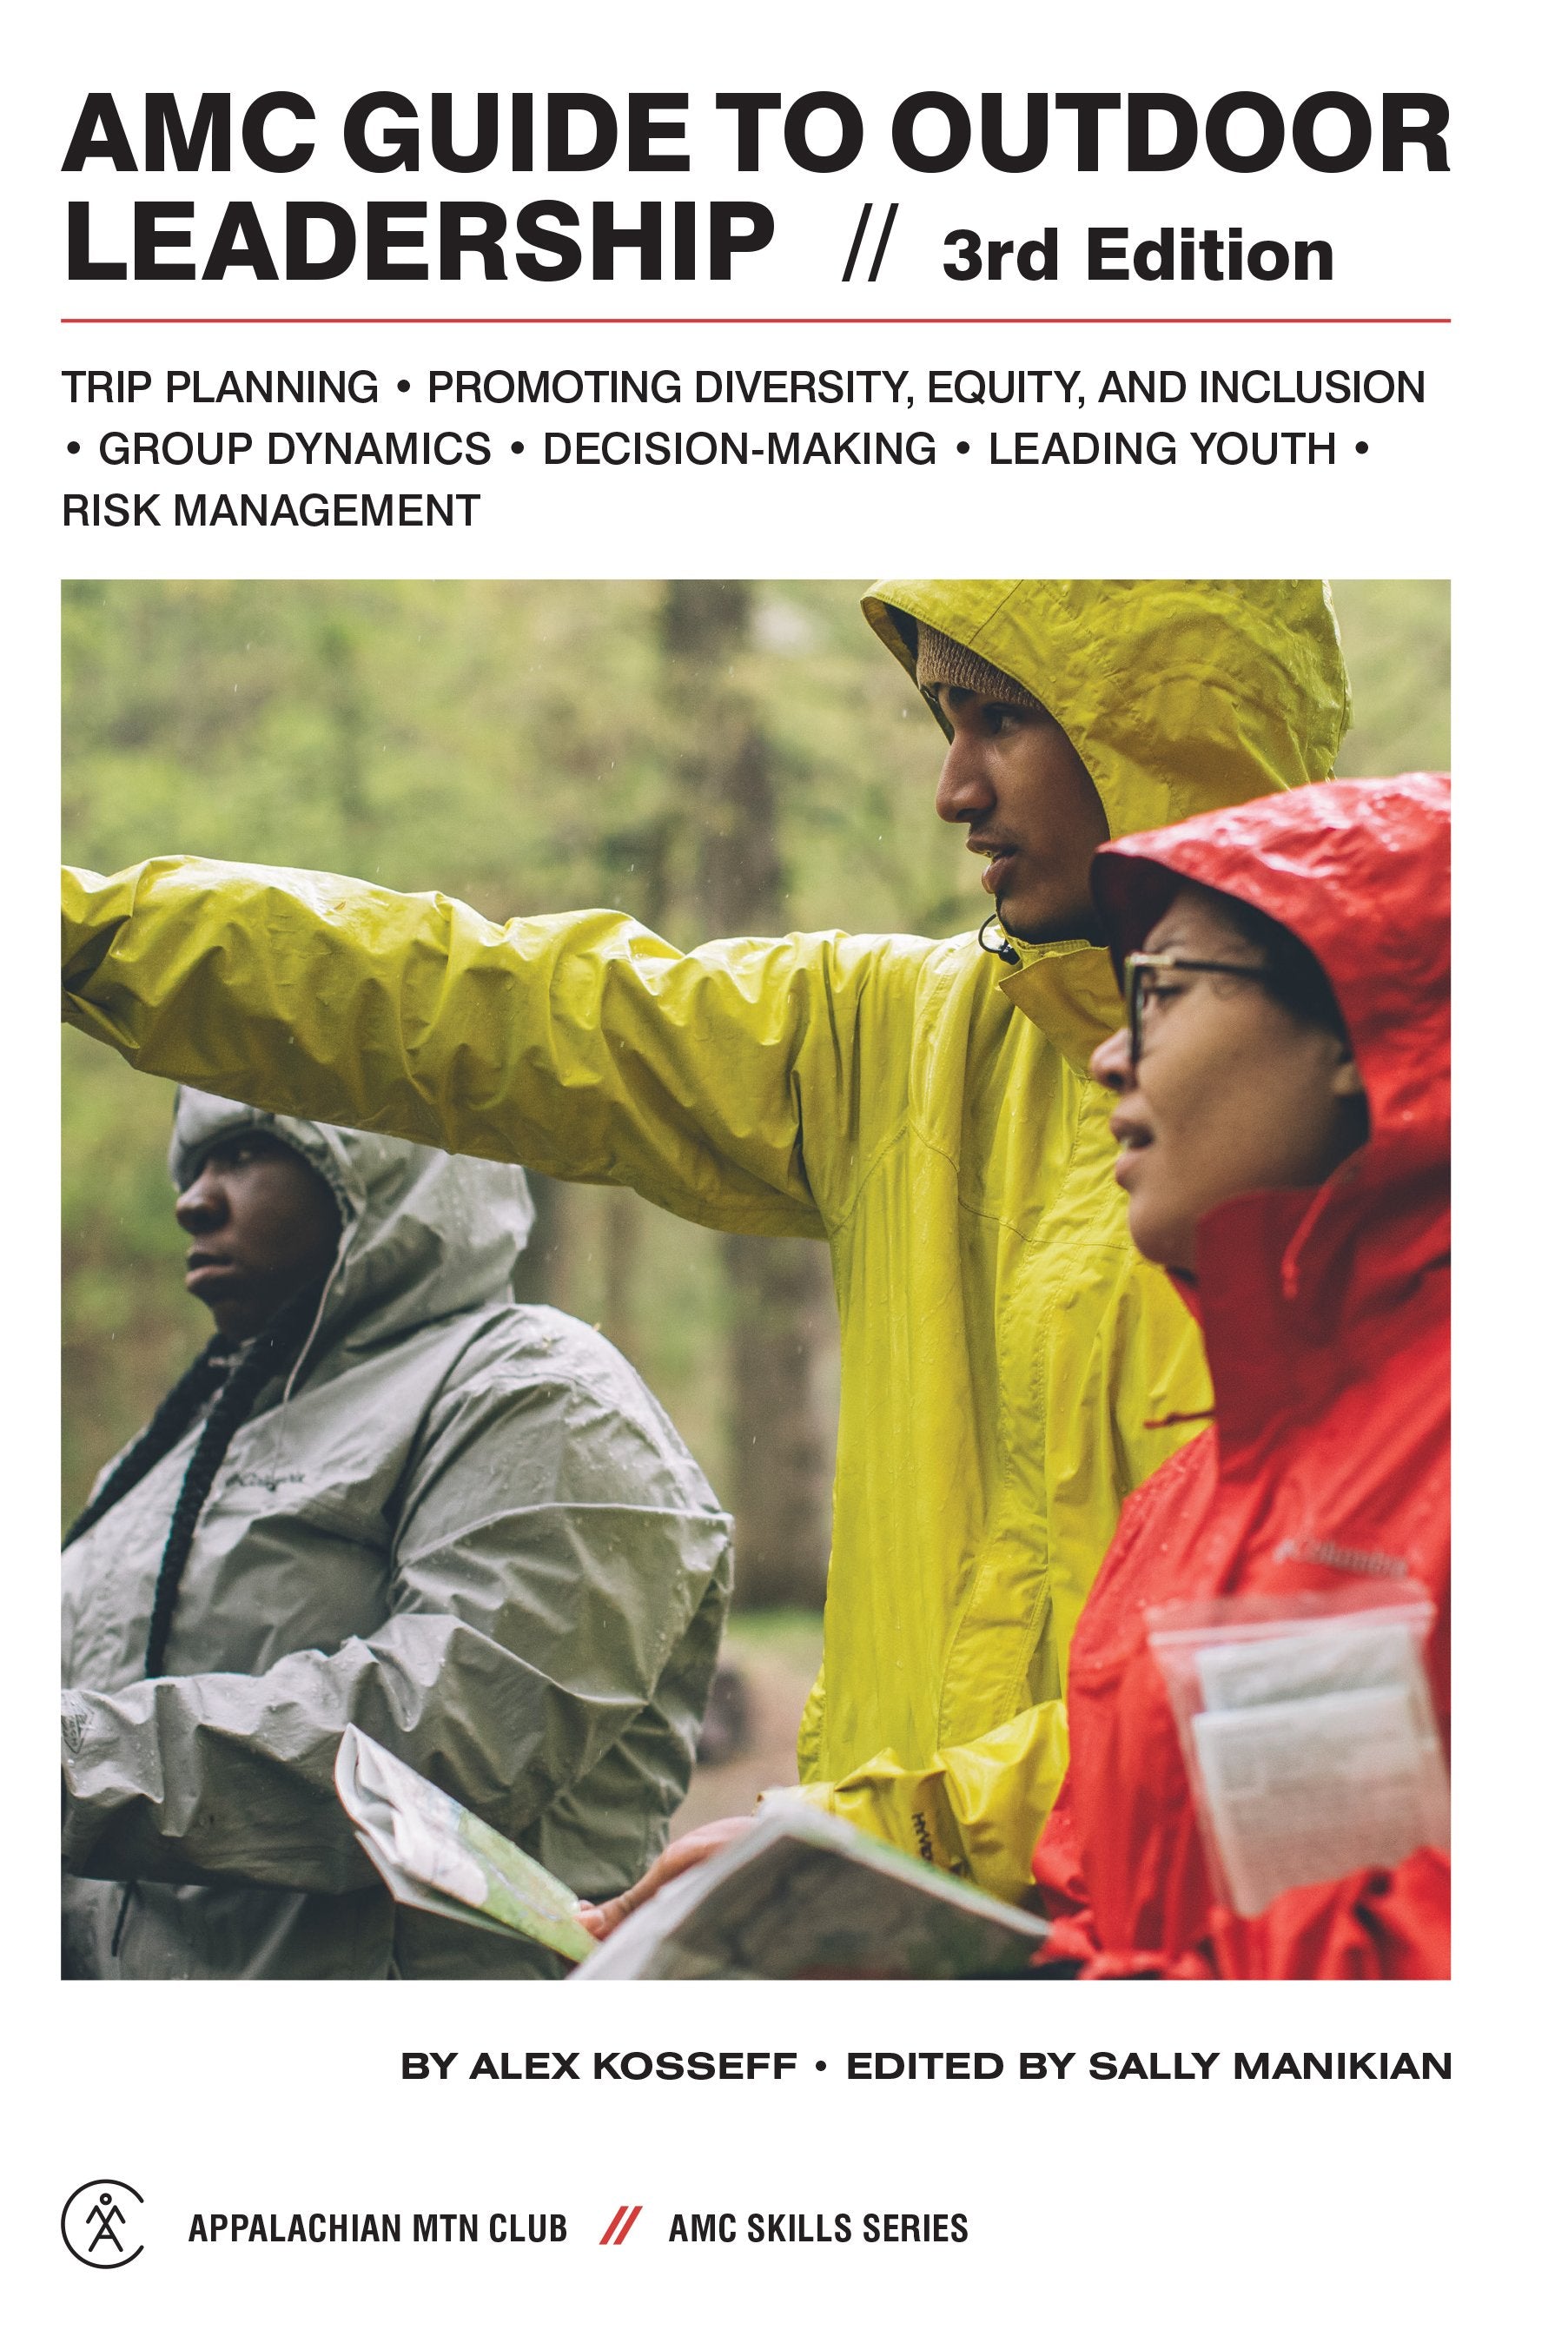 AMC Guide to Outdoor Leadership, 3rd Edition